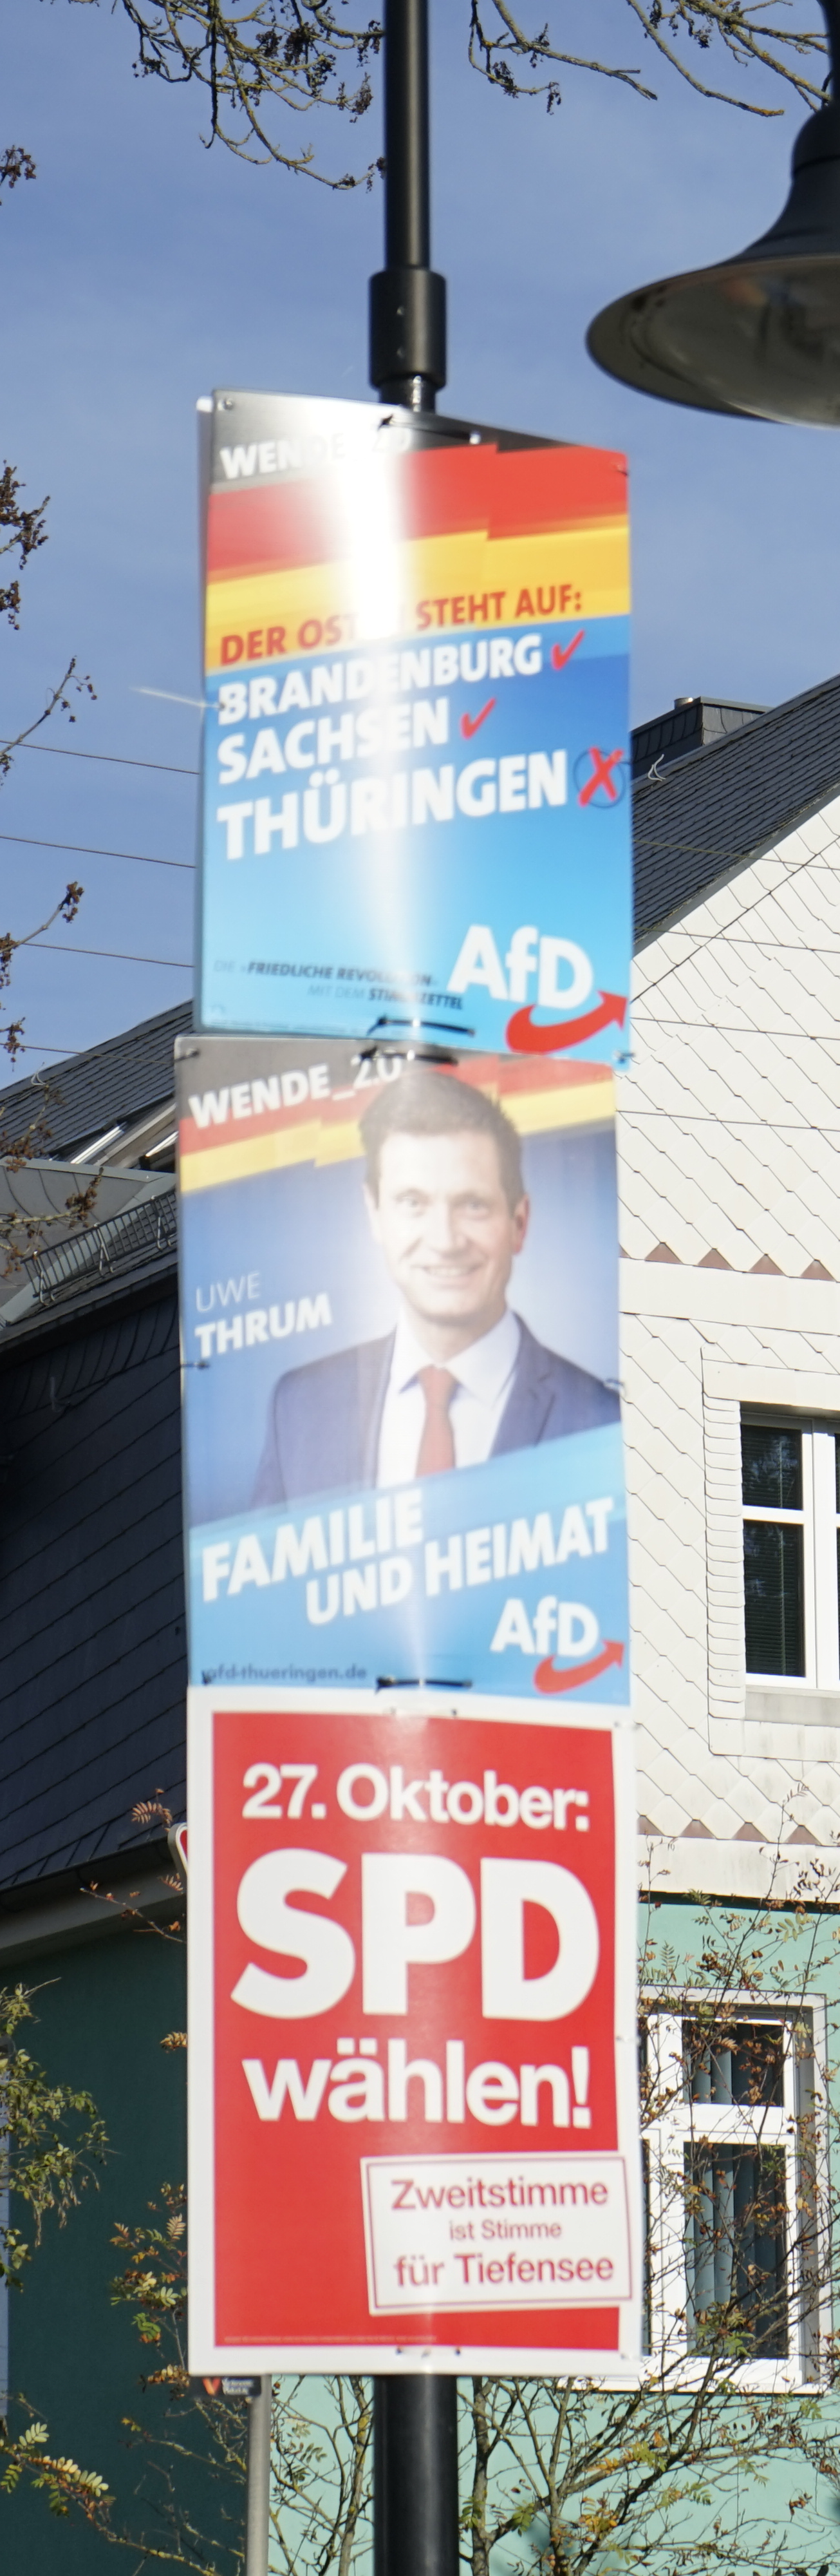 File Wahlplakate Der Afd Spd In Thuringen 005 Png Wikimedia Commons